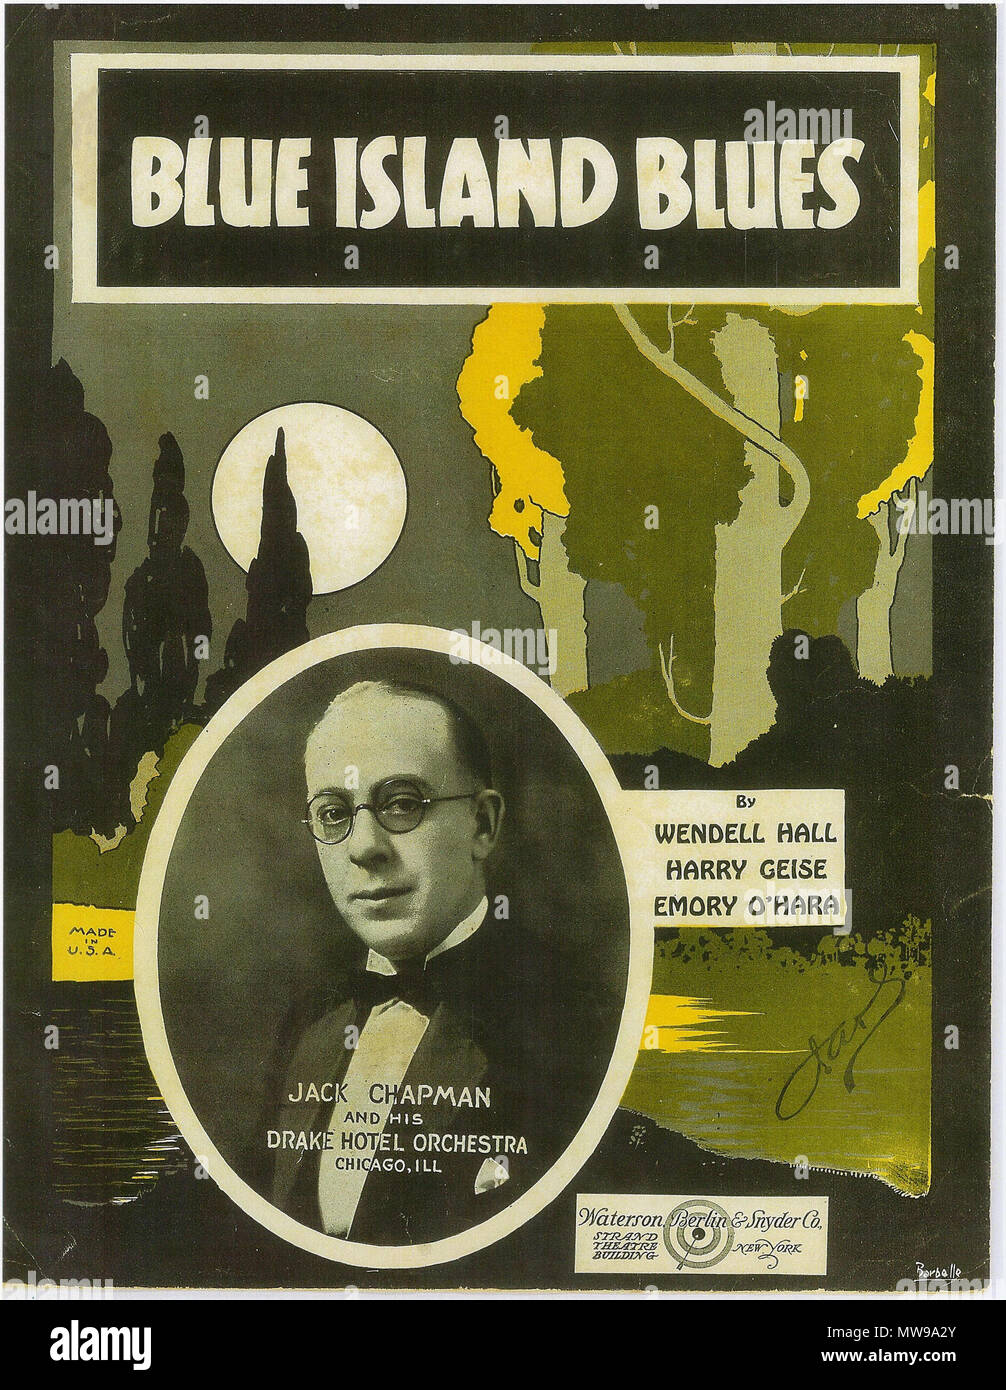 . 'Blue Island Blues' sheet music cover, with insert photo of Jack Chapman, bandleader at the Drake Hotel, Chicago. 1923. Wendell Hall, Harry Geise, Emory O'Hara. Sheet music cover artwork signed 'Barbelle'. 87 Blue Island Blues Stock Photo